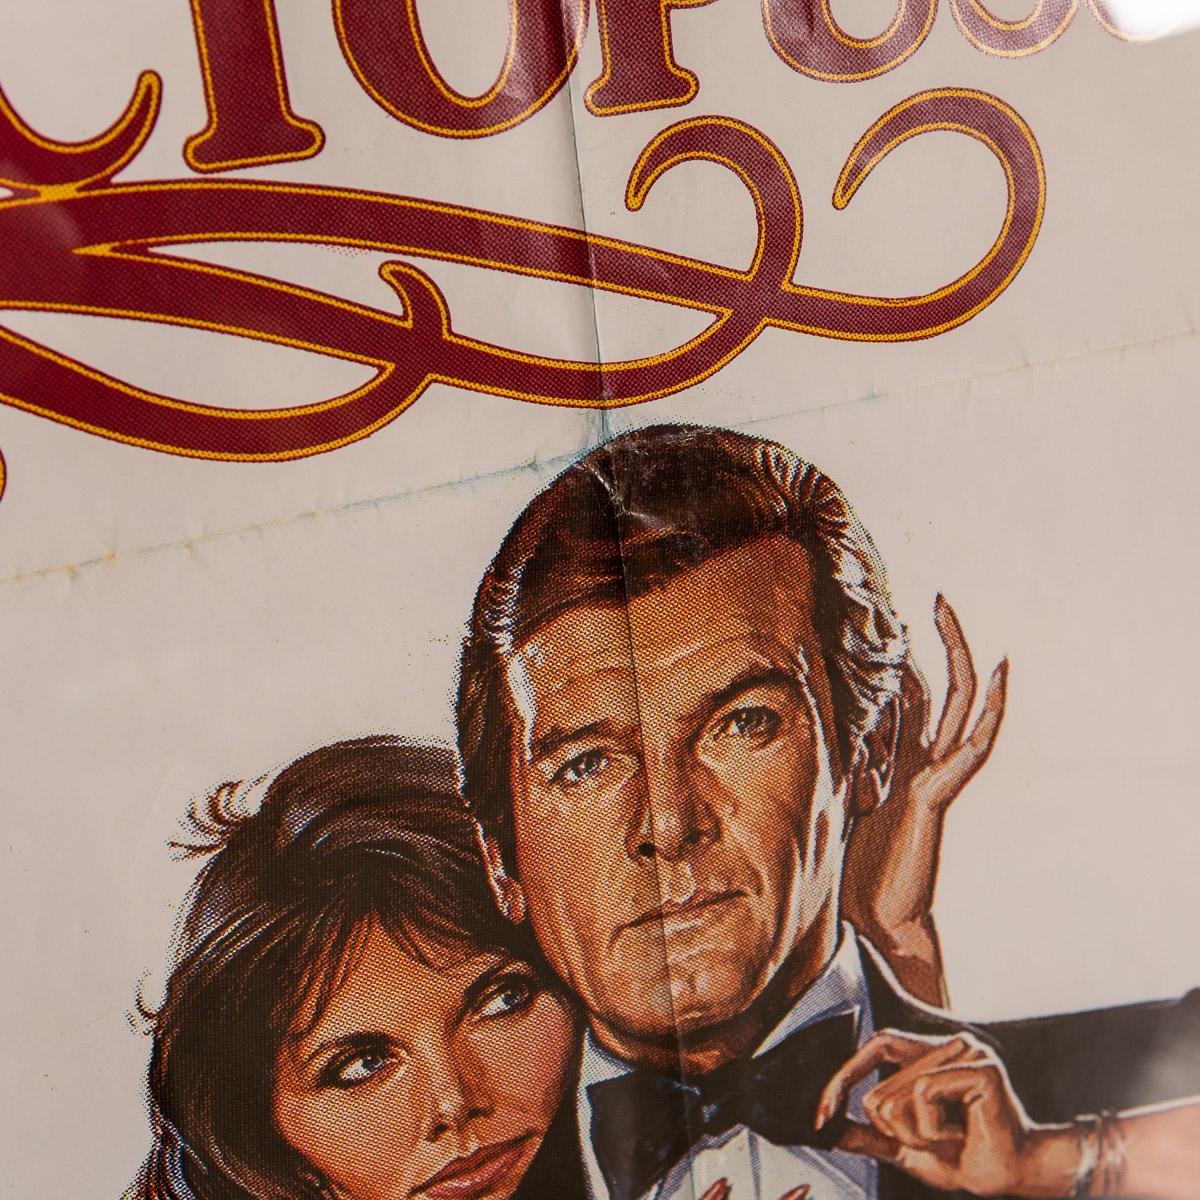 Original French Release James Bond 'Octopussy' Poster, 1983 1